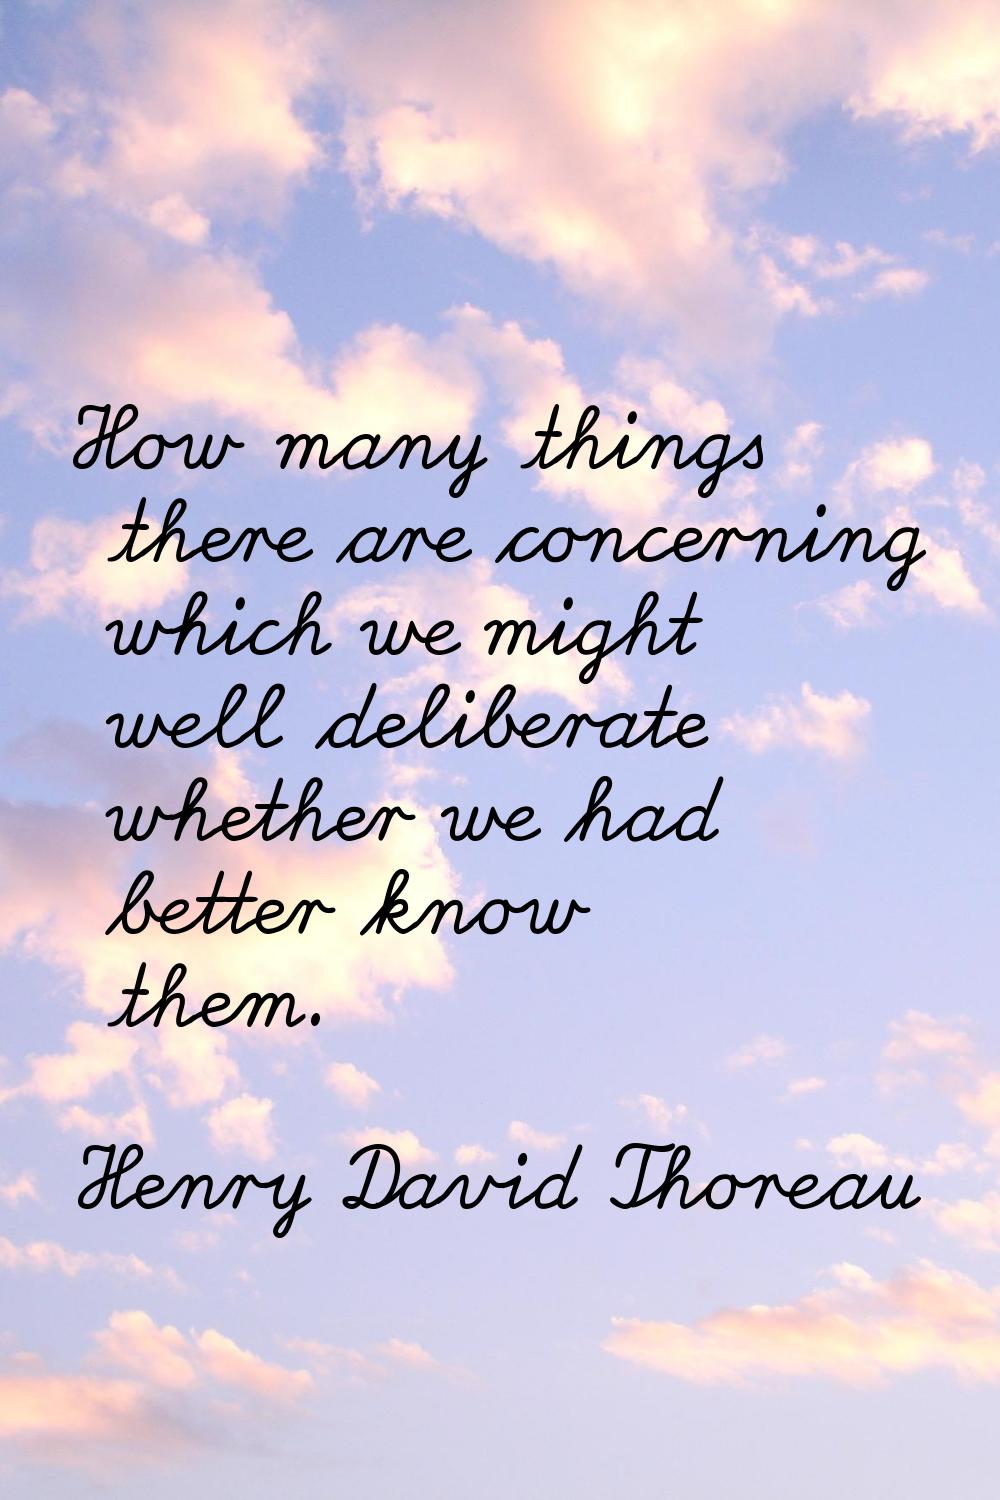 How many things there are concerning which we might well deliberate whether we had better know them